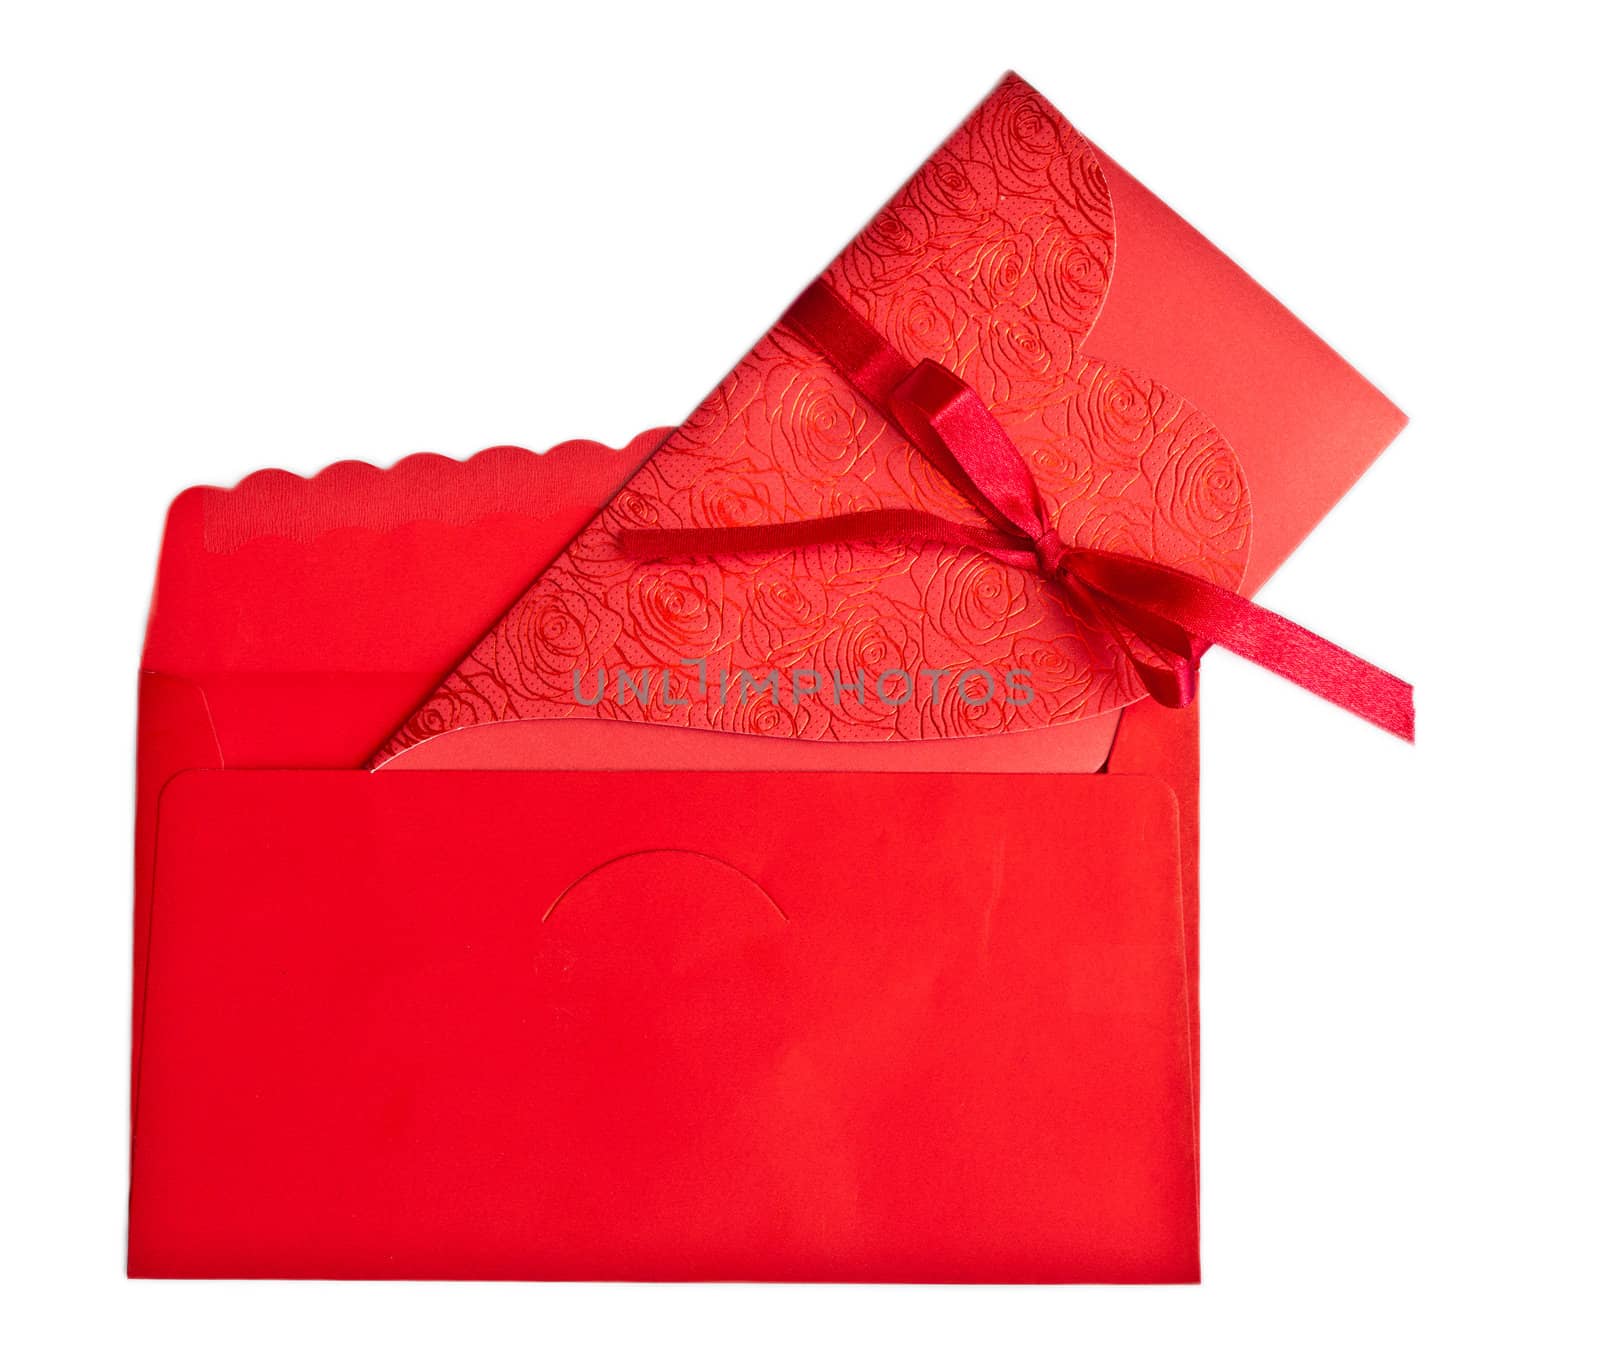 Red marriage invited and envelope with tied red ribbon.